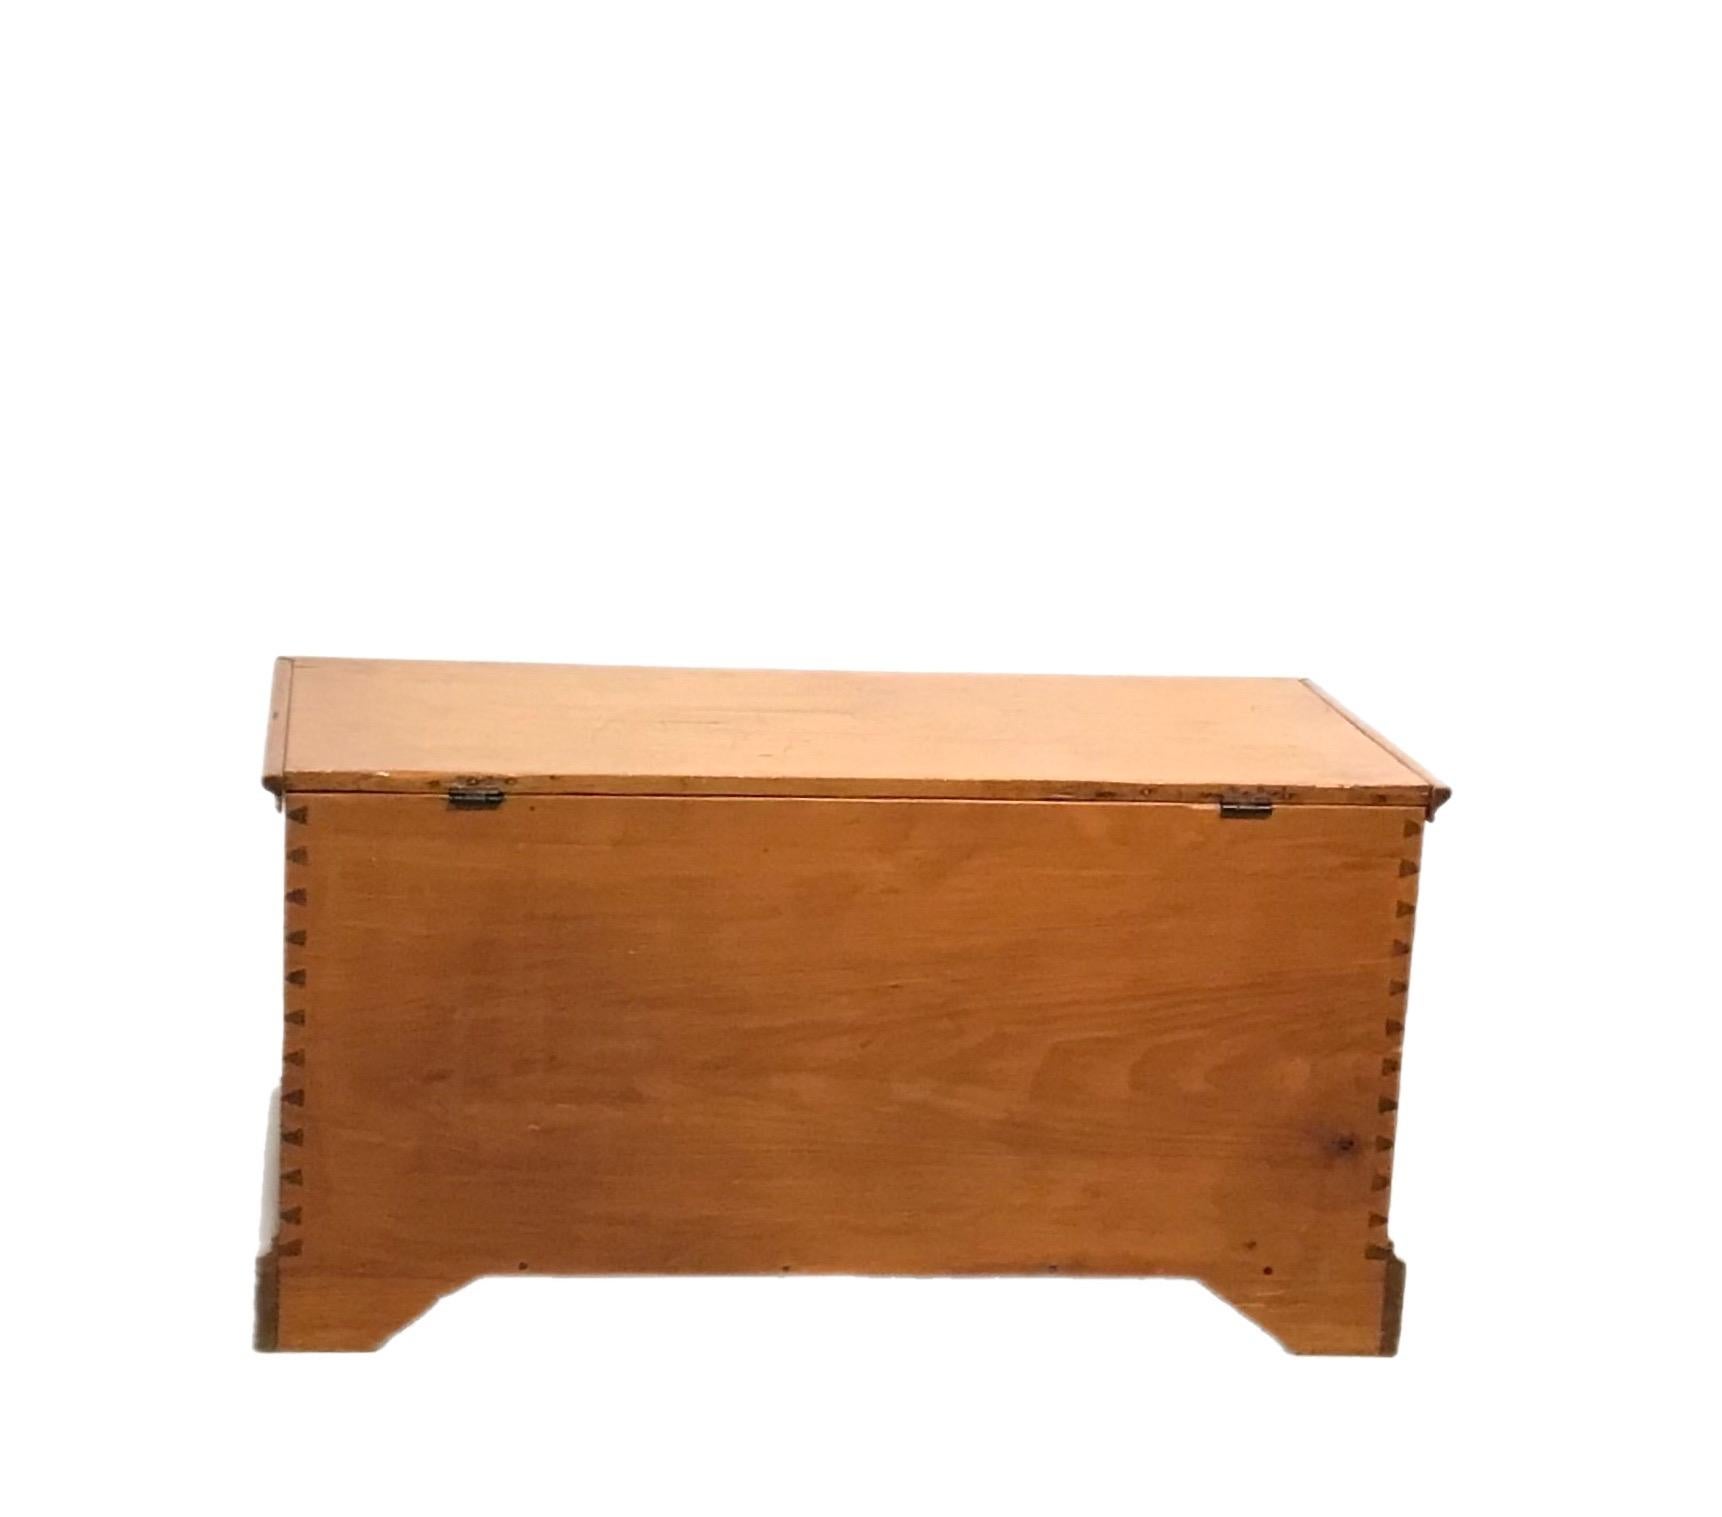 19th Century Early American Blanket Chest For Sale